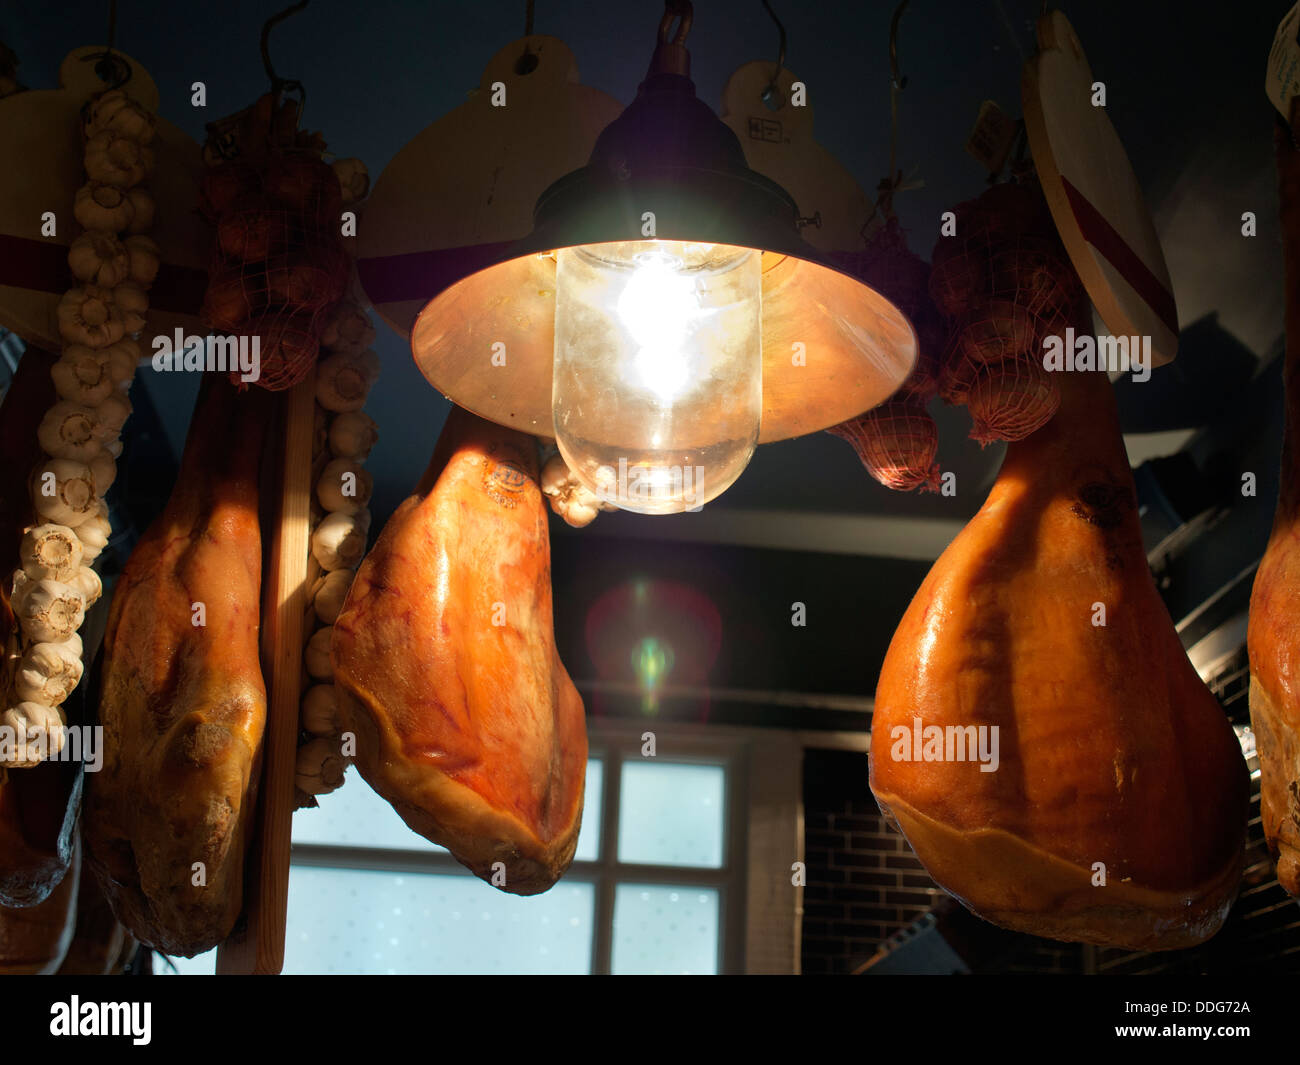 Suspended hams in an Italian Restaurant in Oxford, England Stock Photo